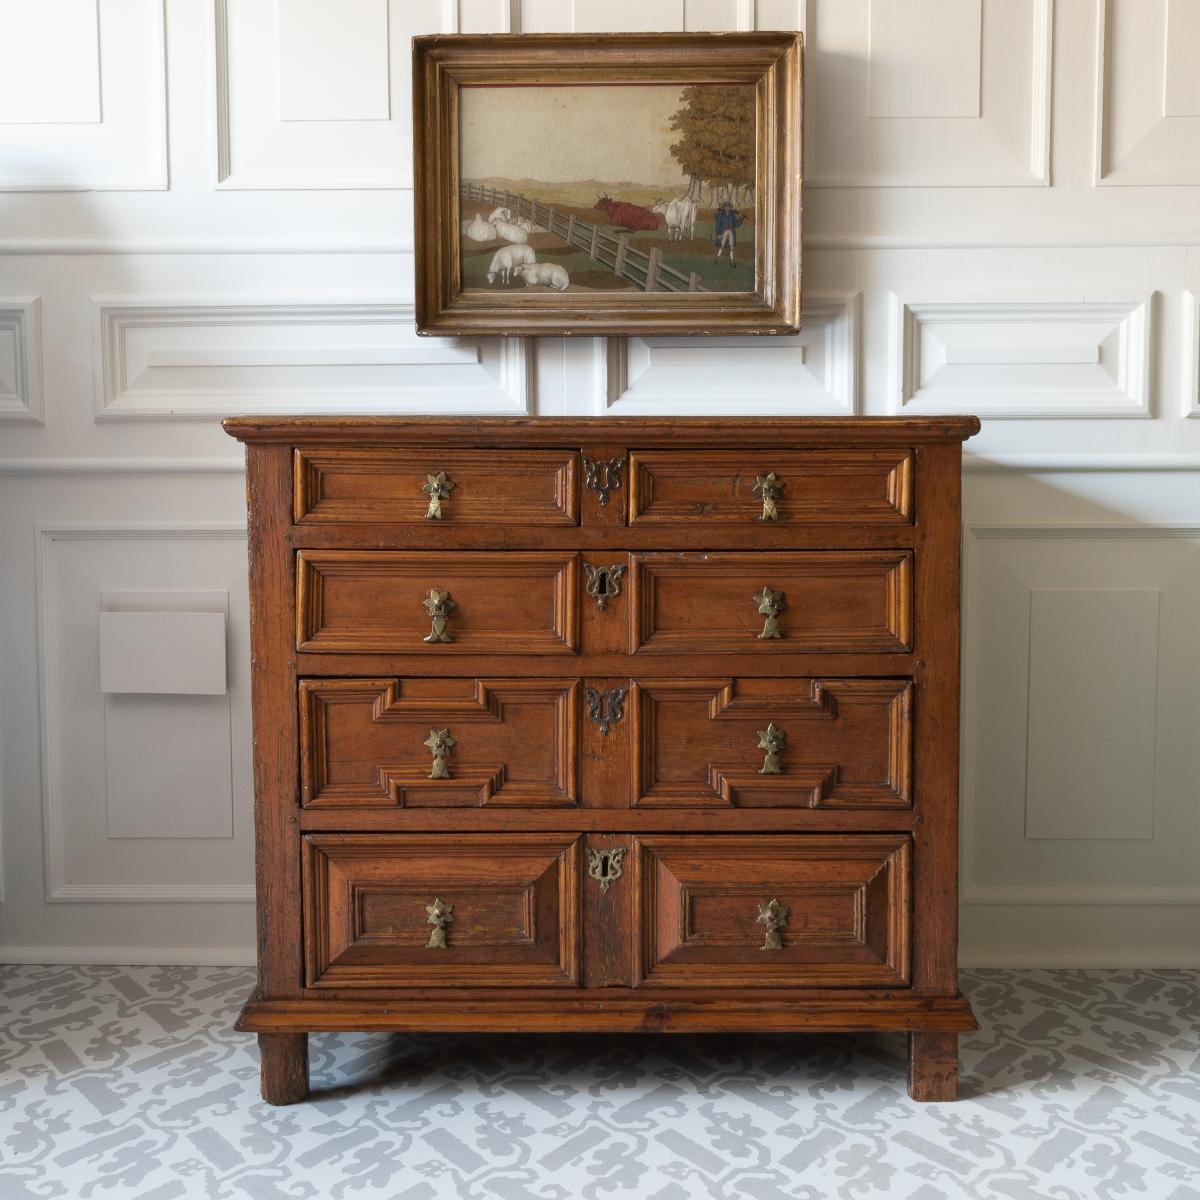 A 17th century pine chest of drawers, pictured straight on